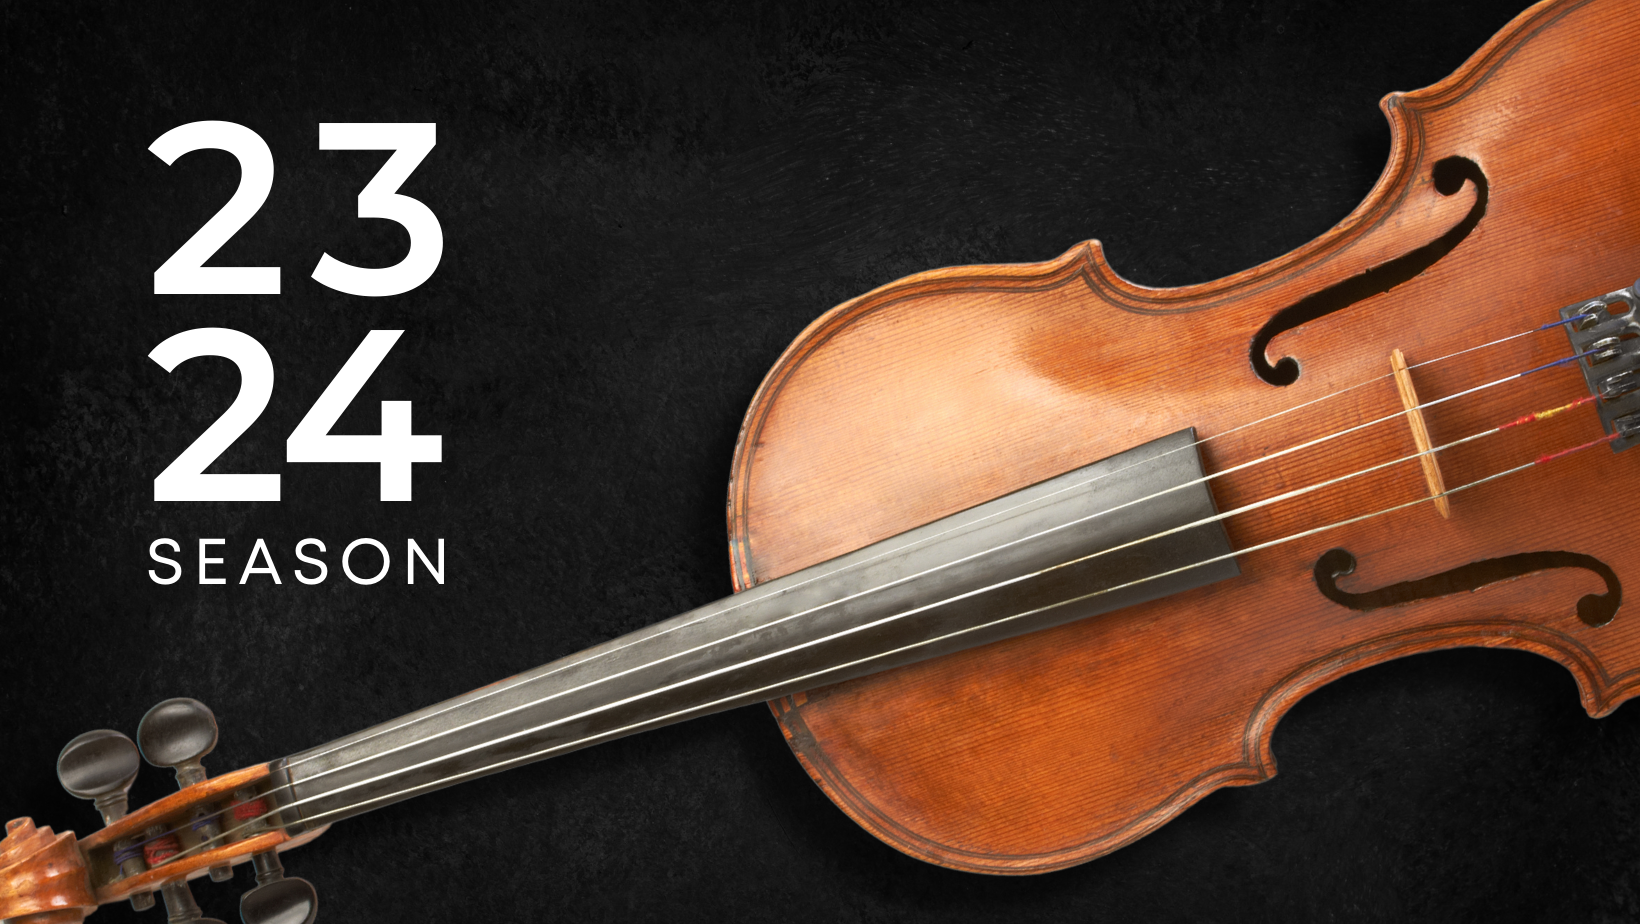 23-24 Season: striking new compositions and powerful classics. A violin is laying on a diagonal against a gritty, black background.